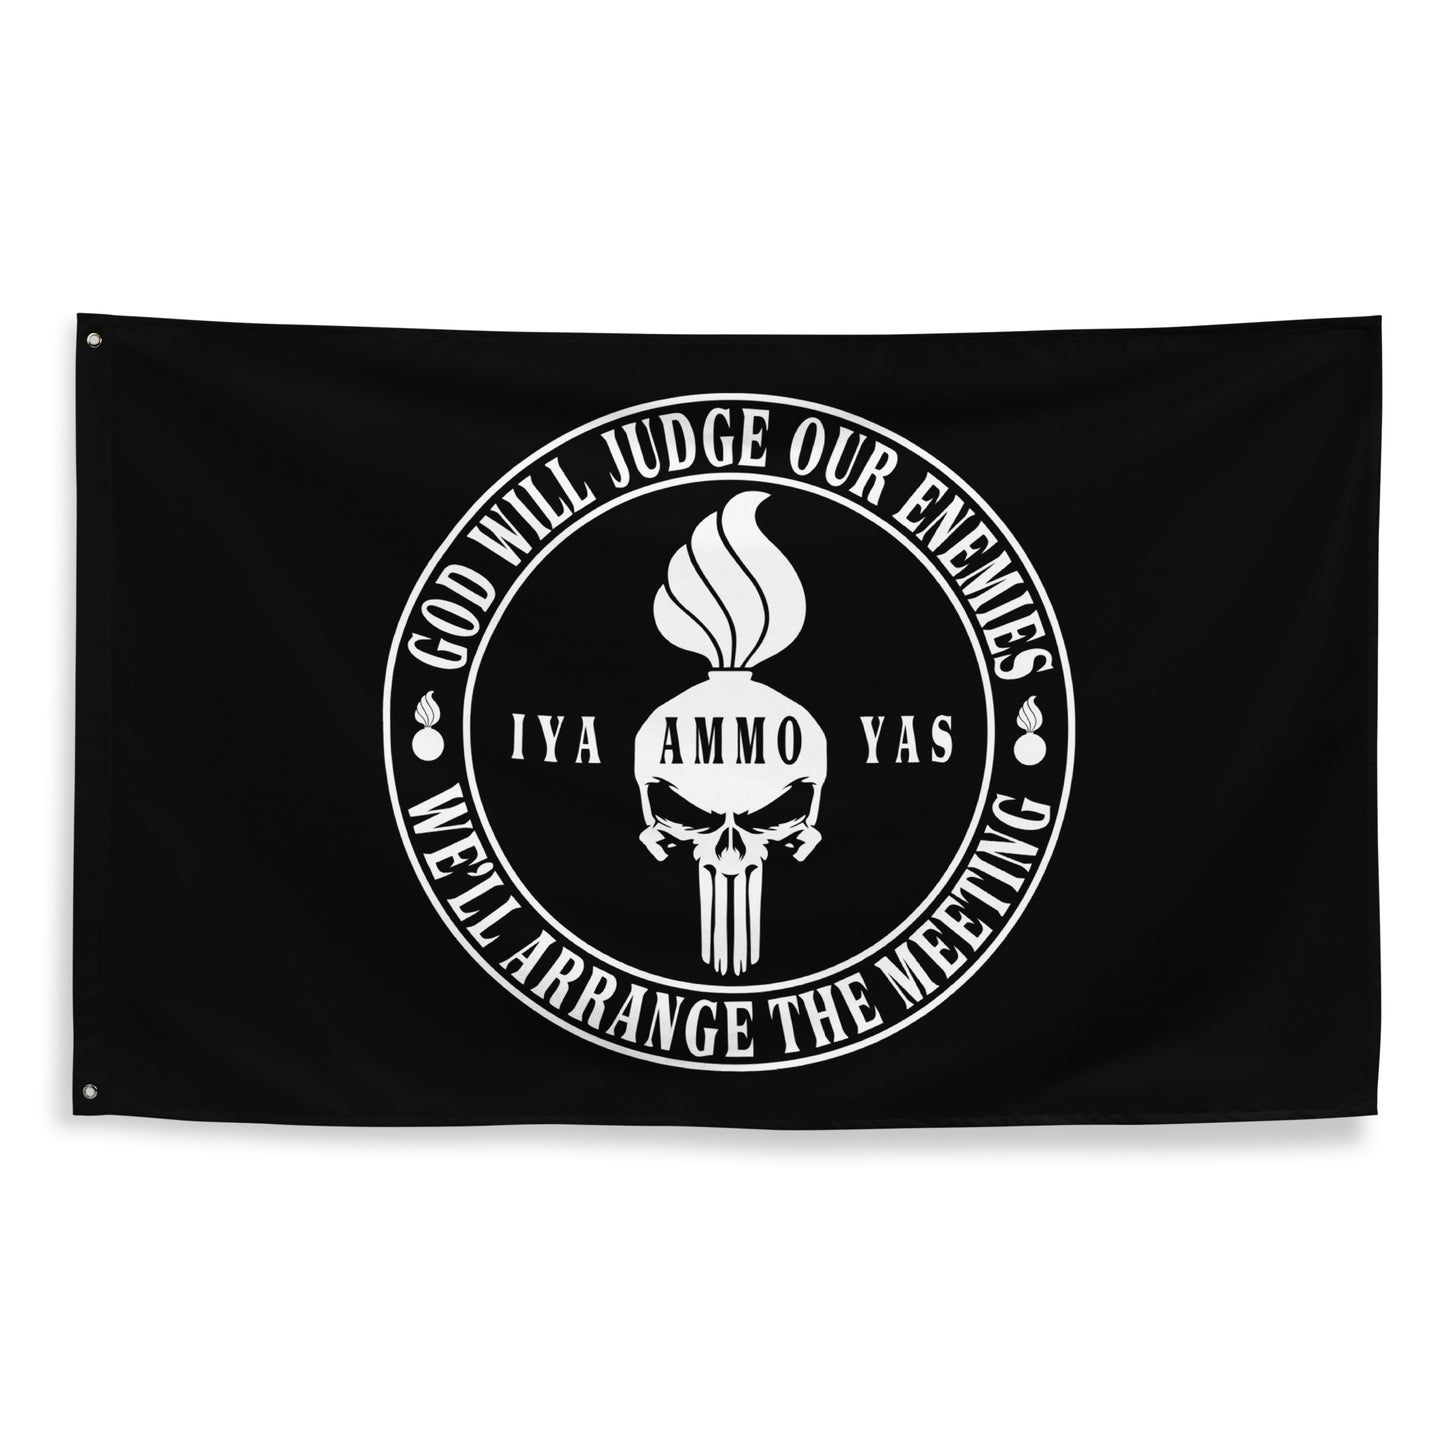 USAF AMMO Punisher Pisspot God Will Judge Our Enemies Circle Logo One-Sided Wall Flag